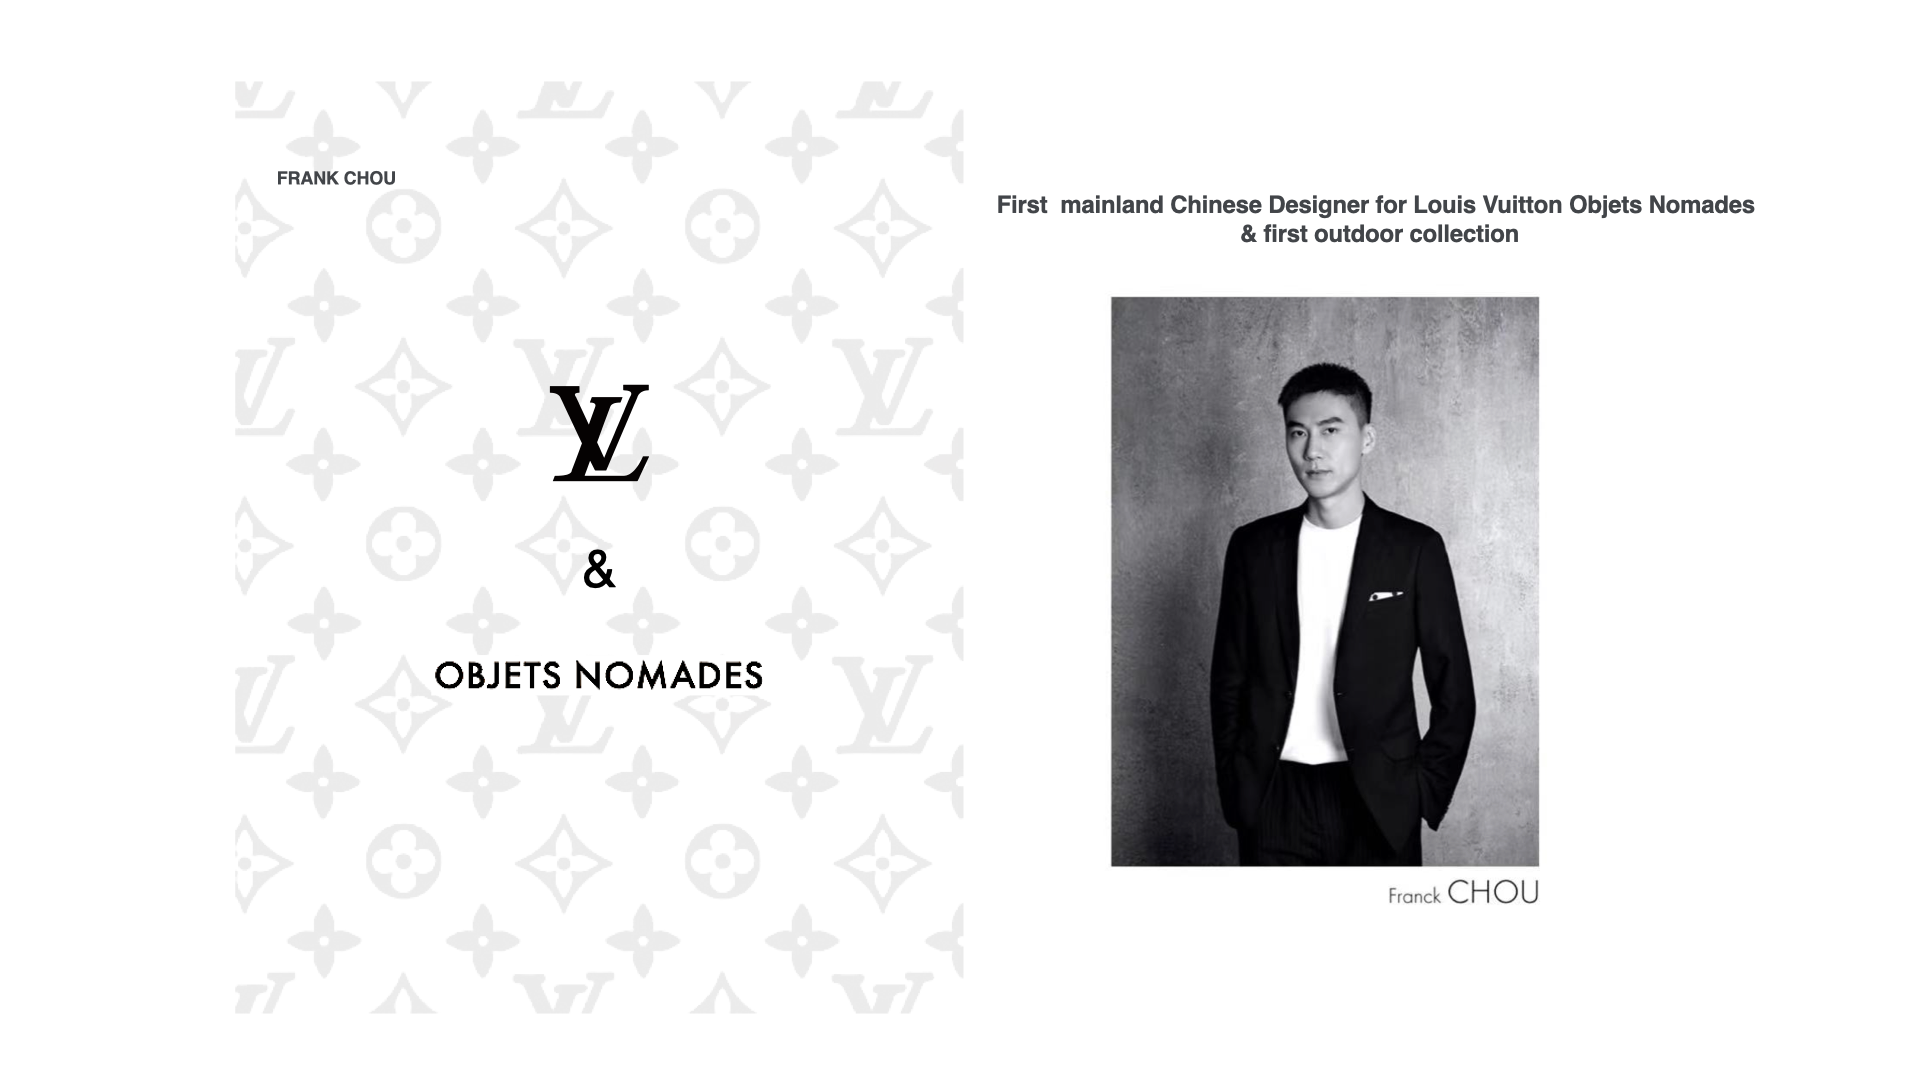 Frank Chou is the Latest Designer of Louis Vuitton Objets Nomades